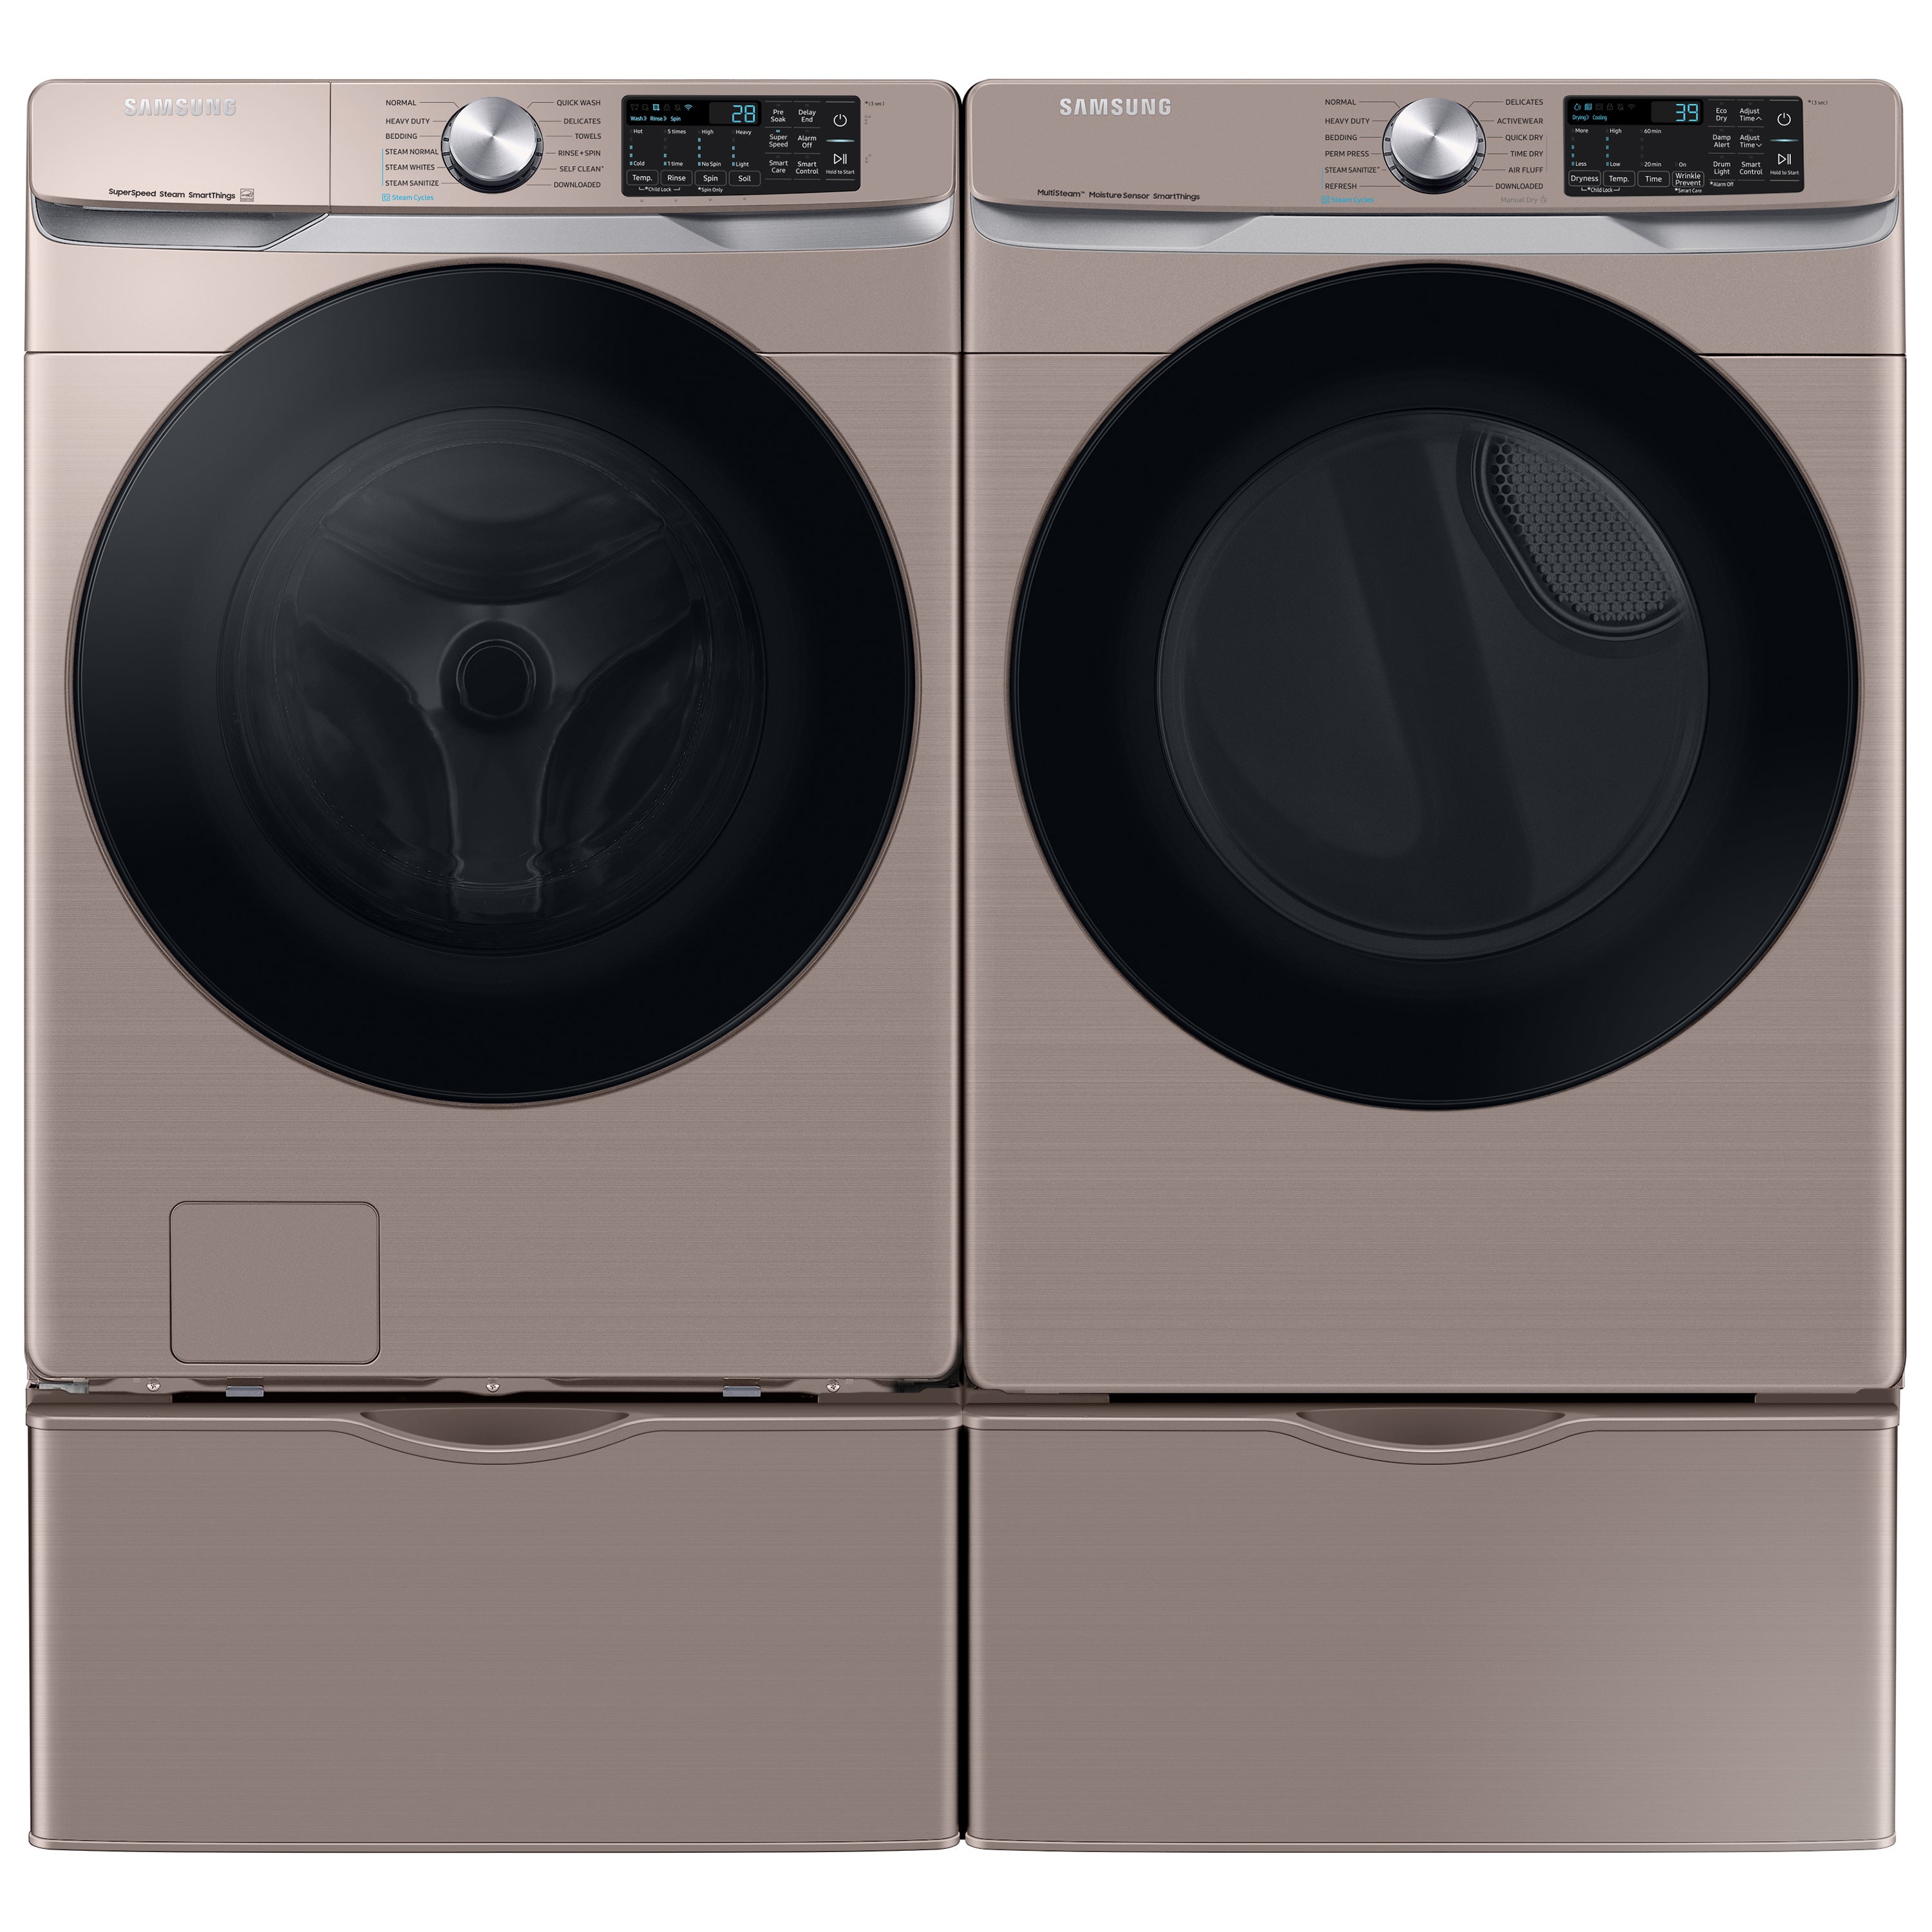 WF45R6100AC in Champagne by Samsung in Hamilton, NJ - 4.5 cu. ft. Front  Load Washer with Steam in Champagne